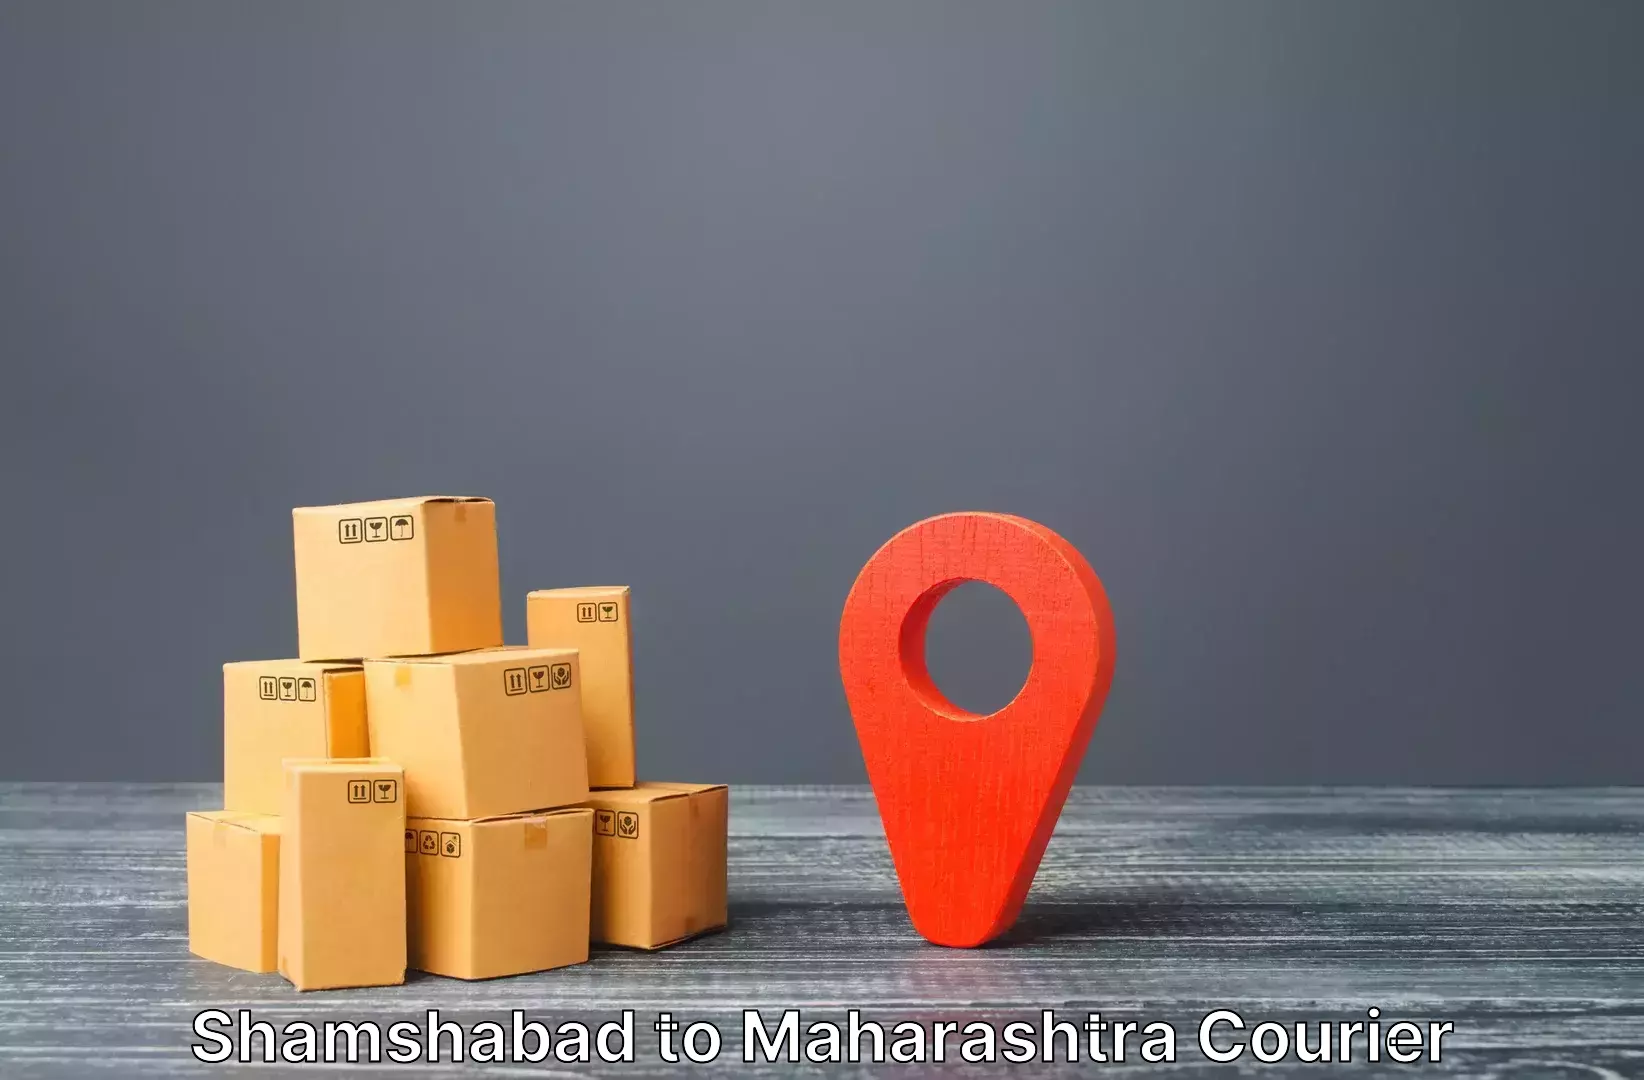 Luggage delivery network Shamshabad to SVKMs Narsee Monjee Institute of Management Studies Mumbai